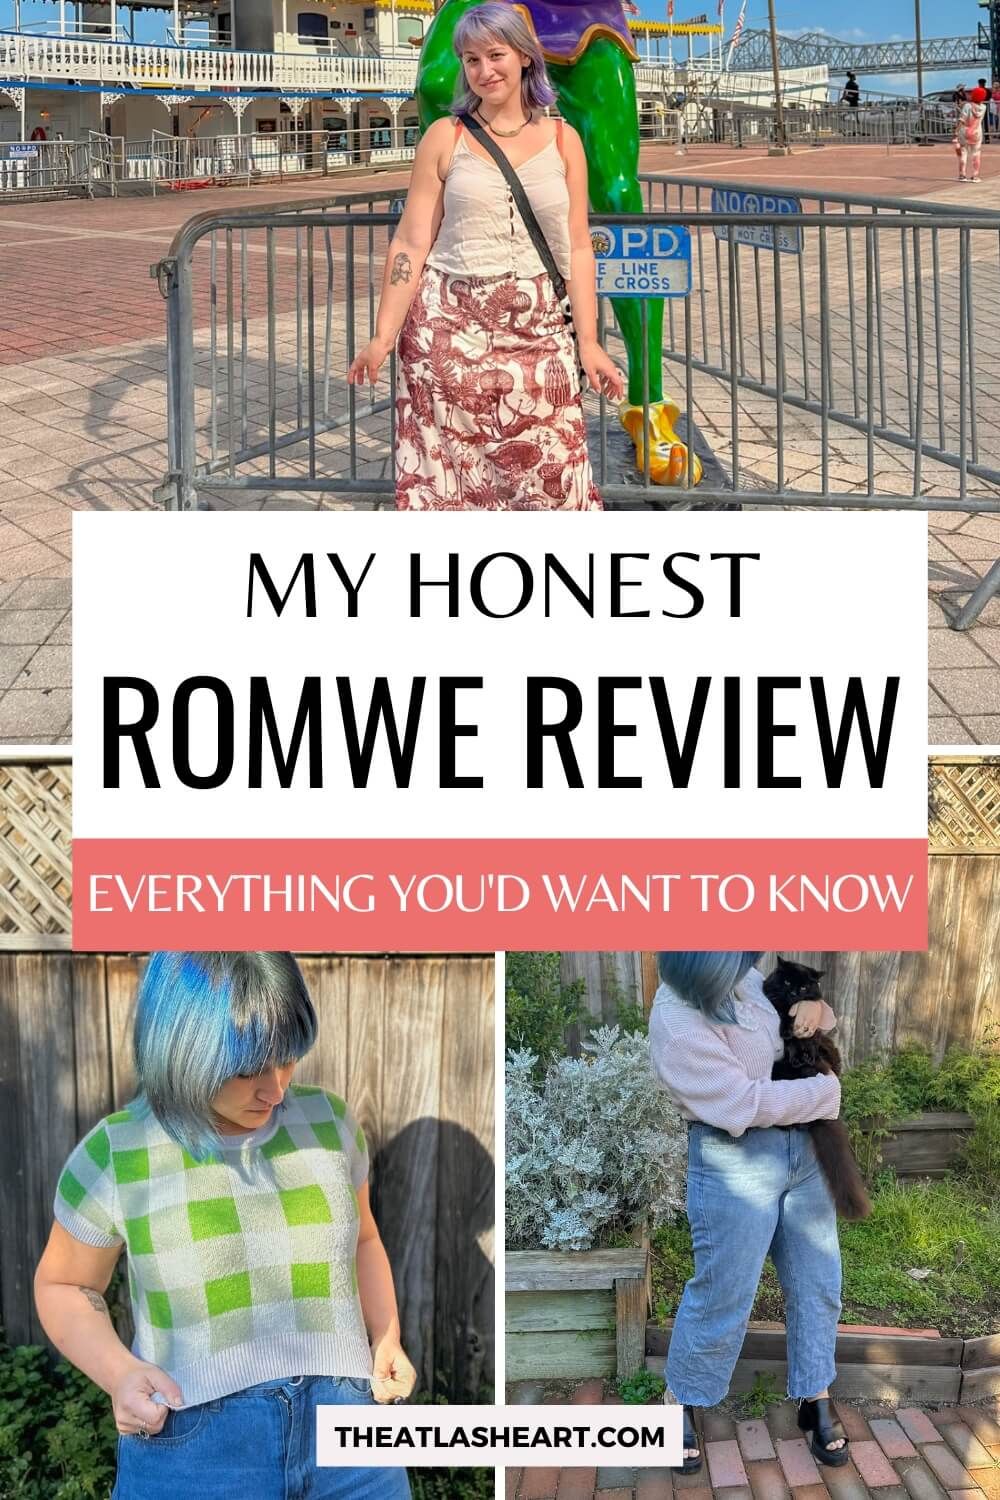 A collage of several images of the same woman with blue and purple hair wearing different, brightly-colored outfits, and the text overlay, "My Honest Romwe Review."